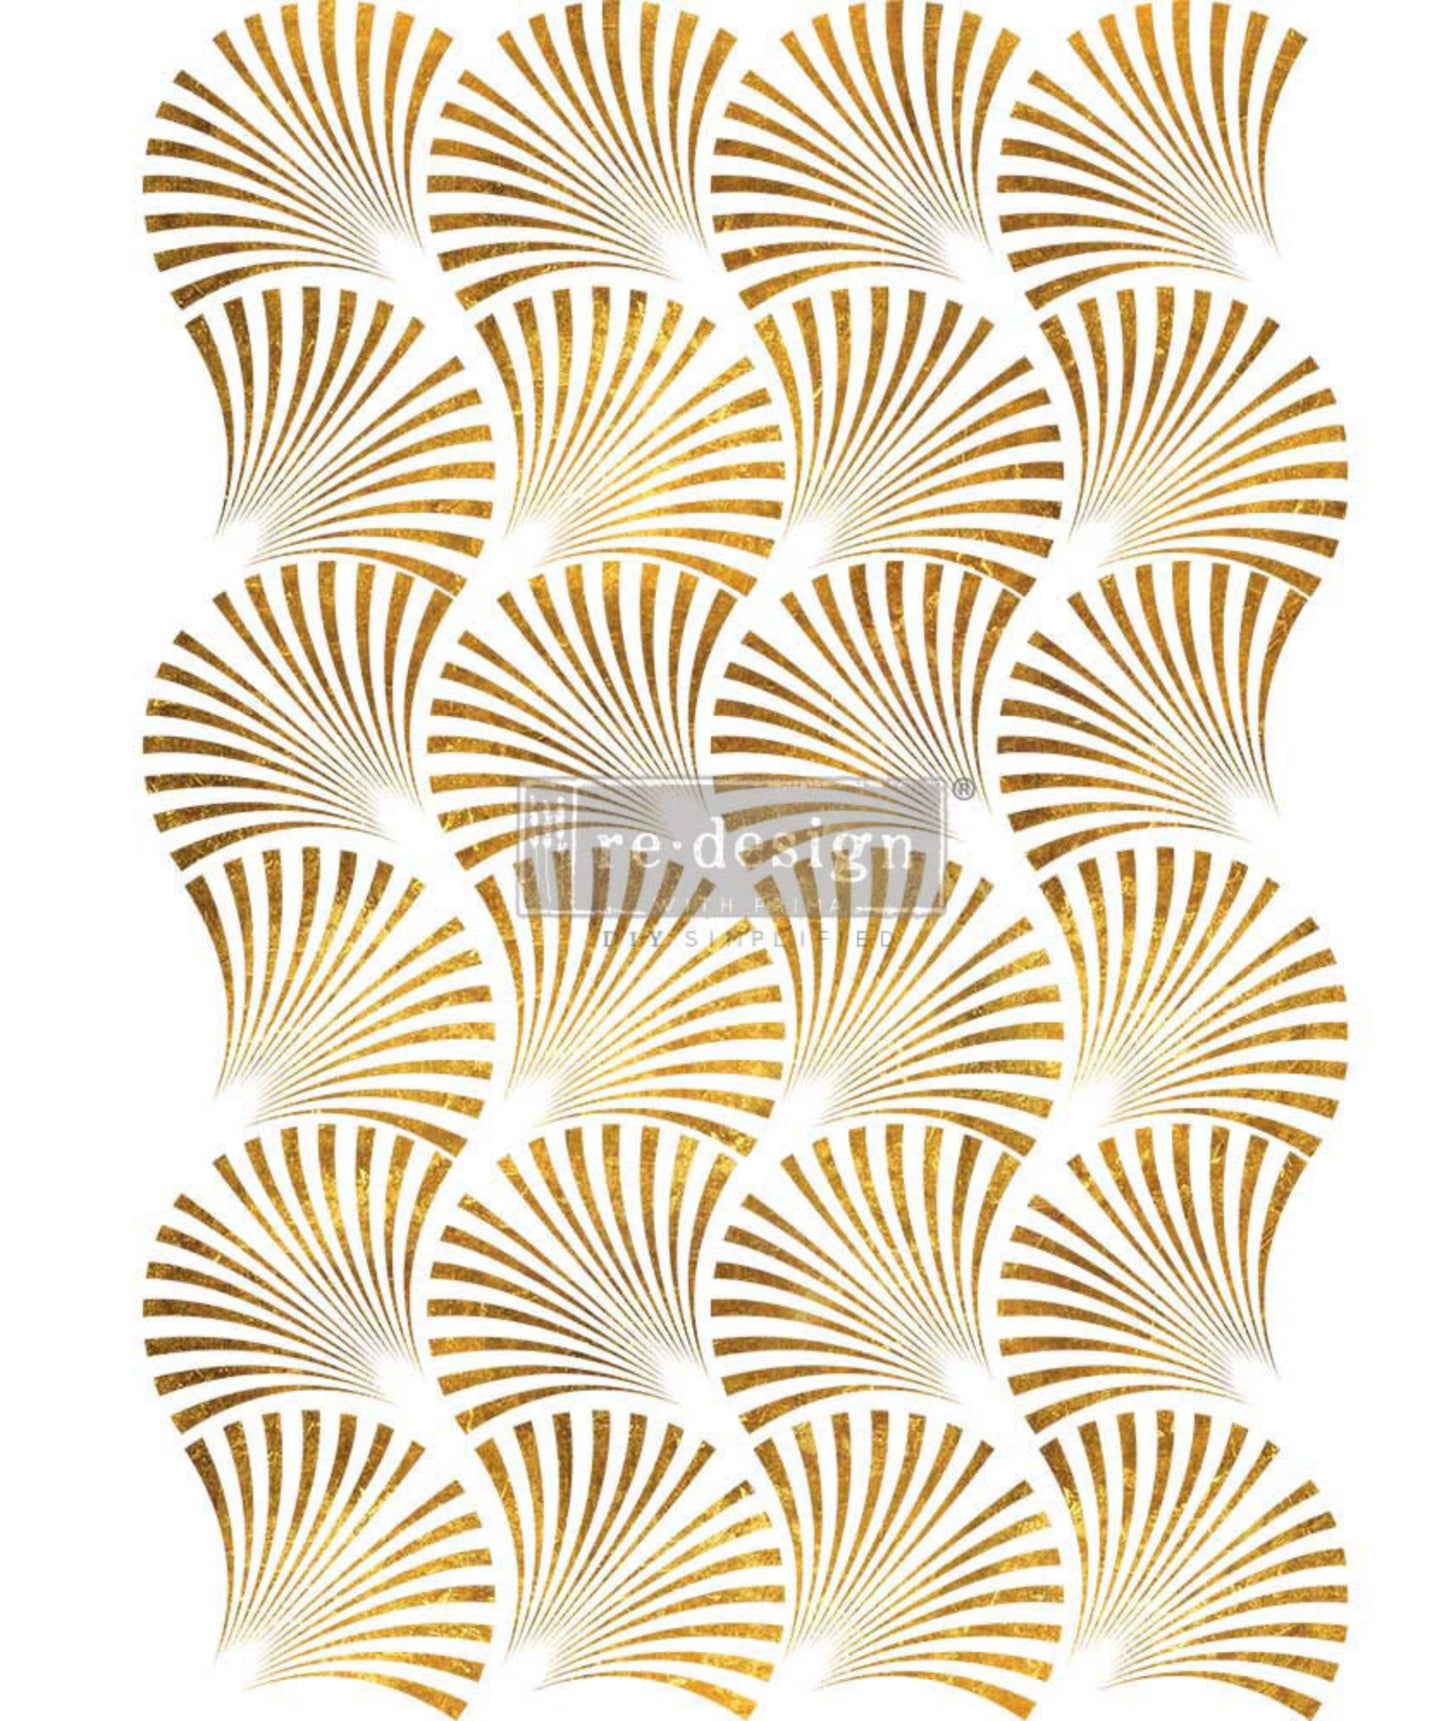 Decor Transfers® – Geo Wave – total sheet size 24×35, cut into 3 sheets